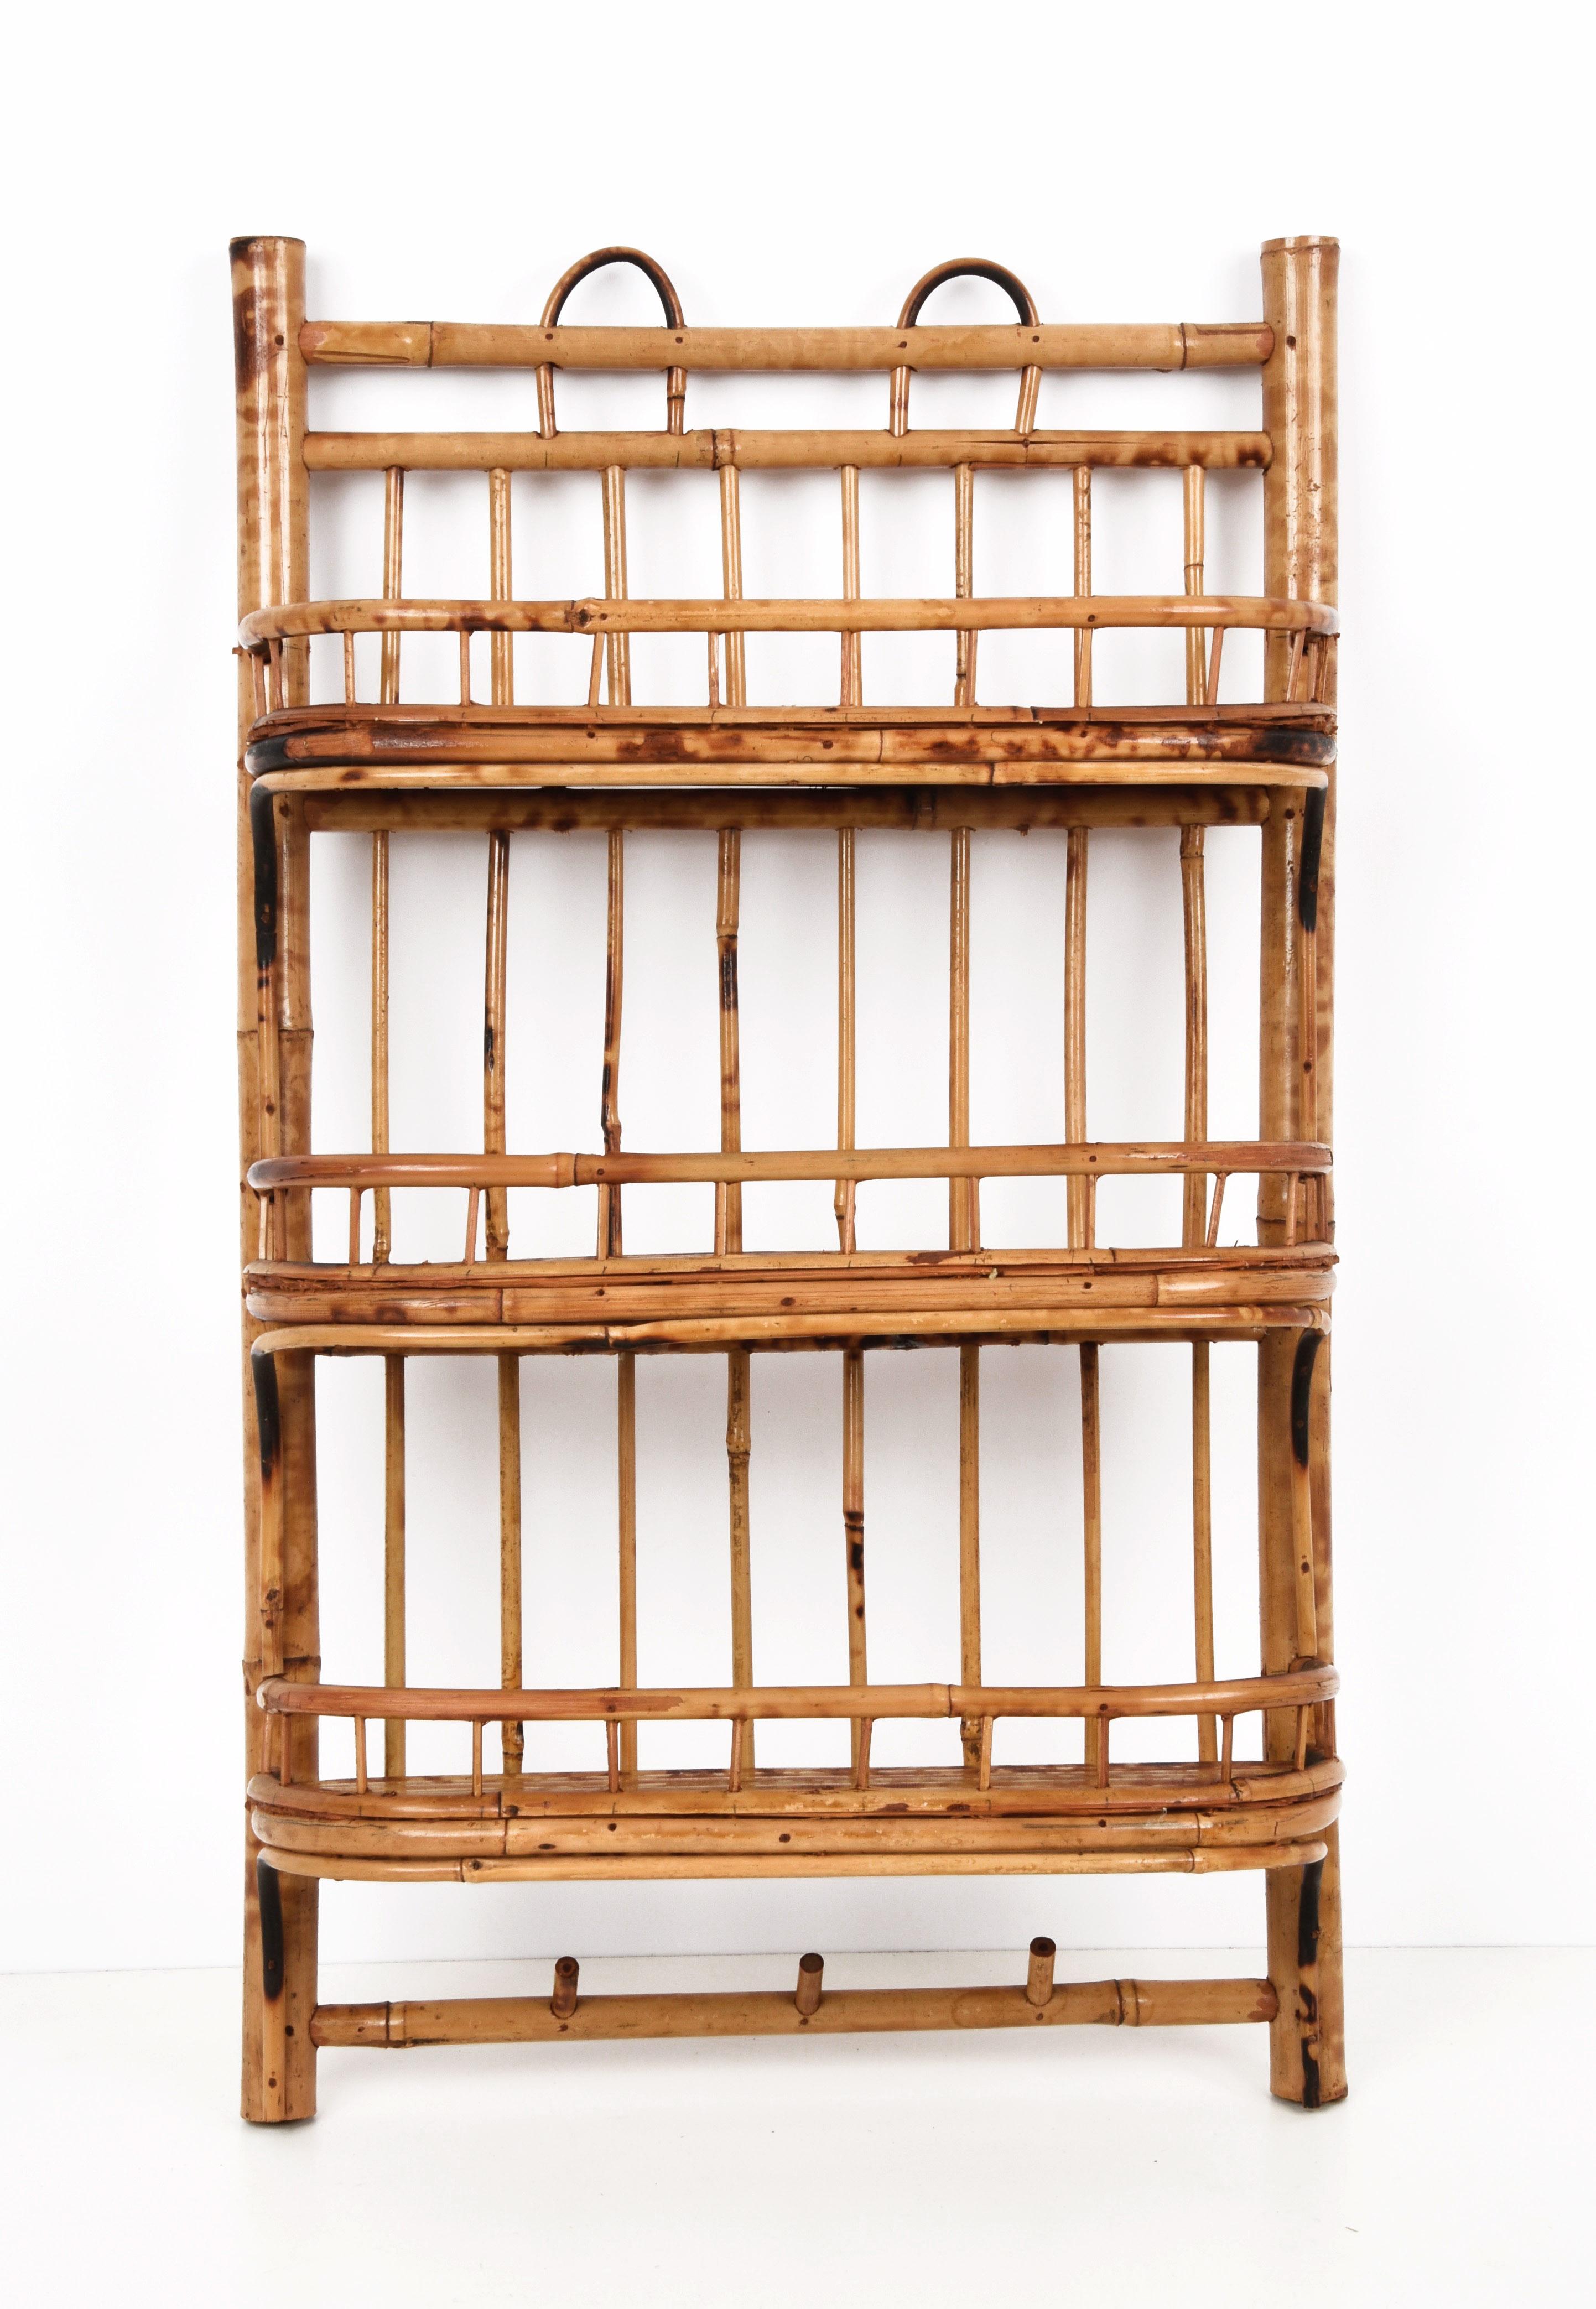 Amazing mid-century bamboo and rattan shelf or hanging side table. This fantastic piece was produced in Italy during the 1960s.

This elegant item is unique in that it has three rattan shelves and three hooks at the bottom.

A multipurpose and